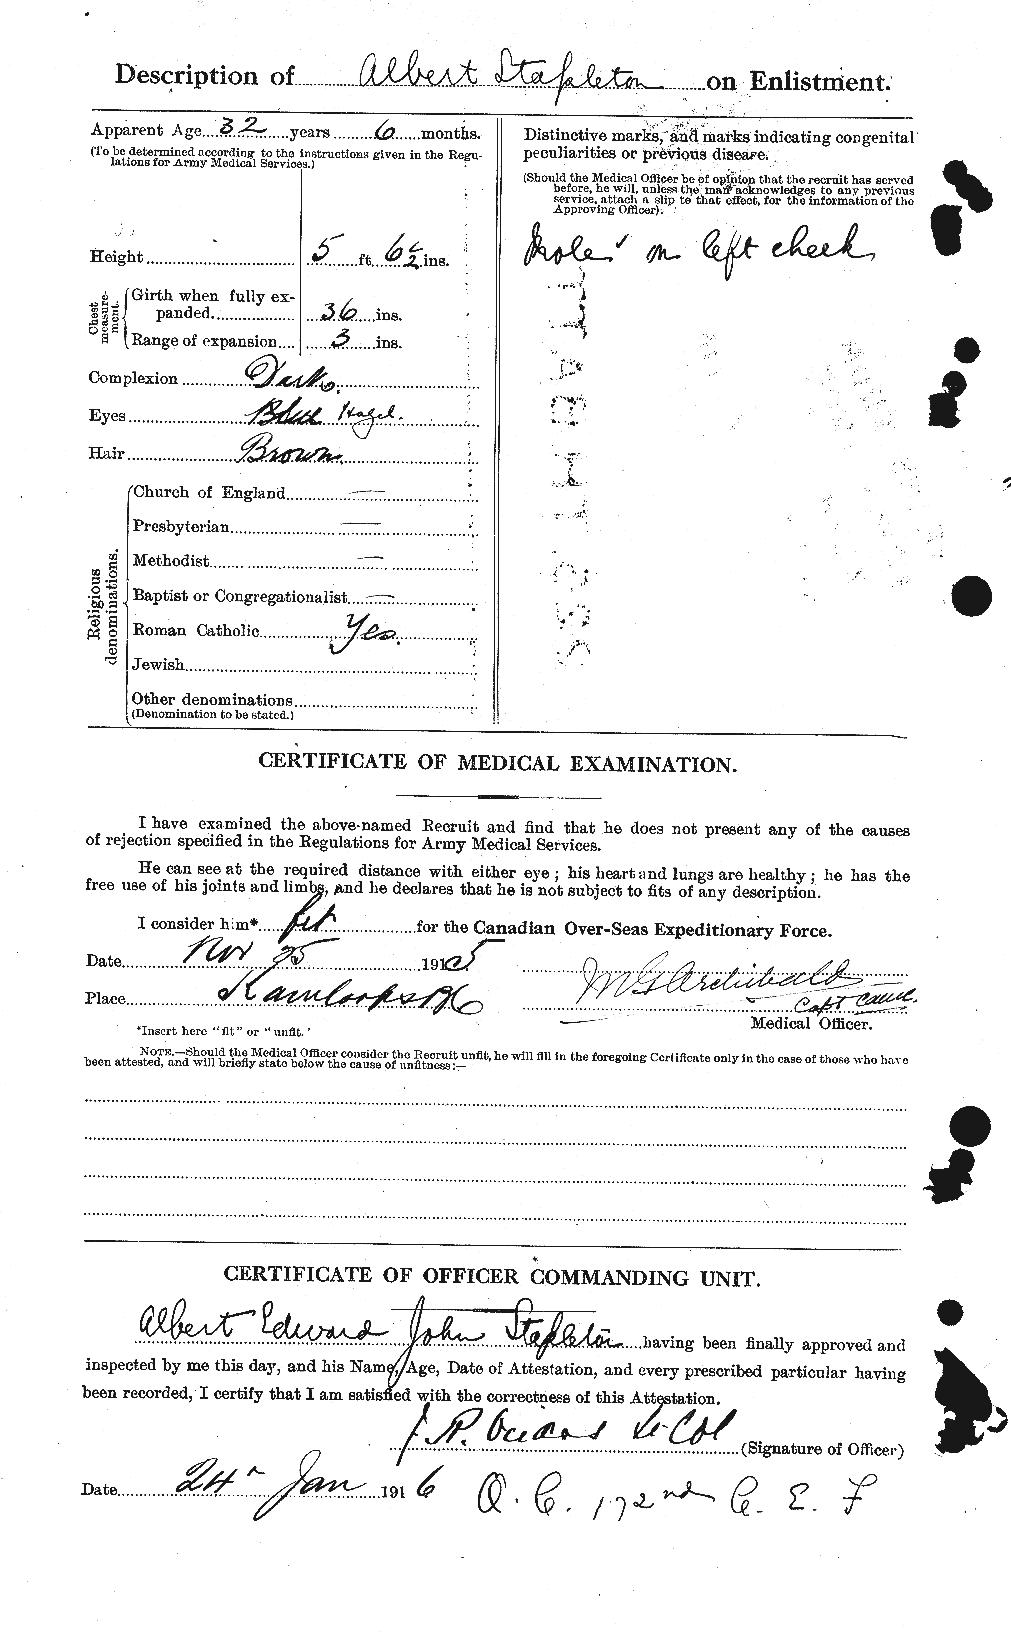 Personnel Records of the First World War - CEF 114118b